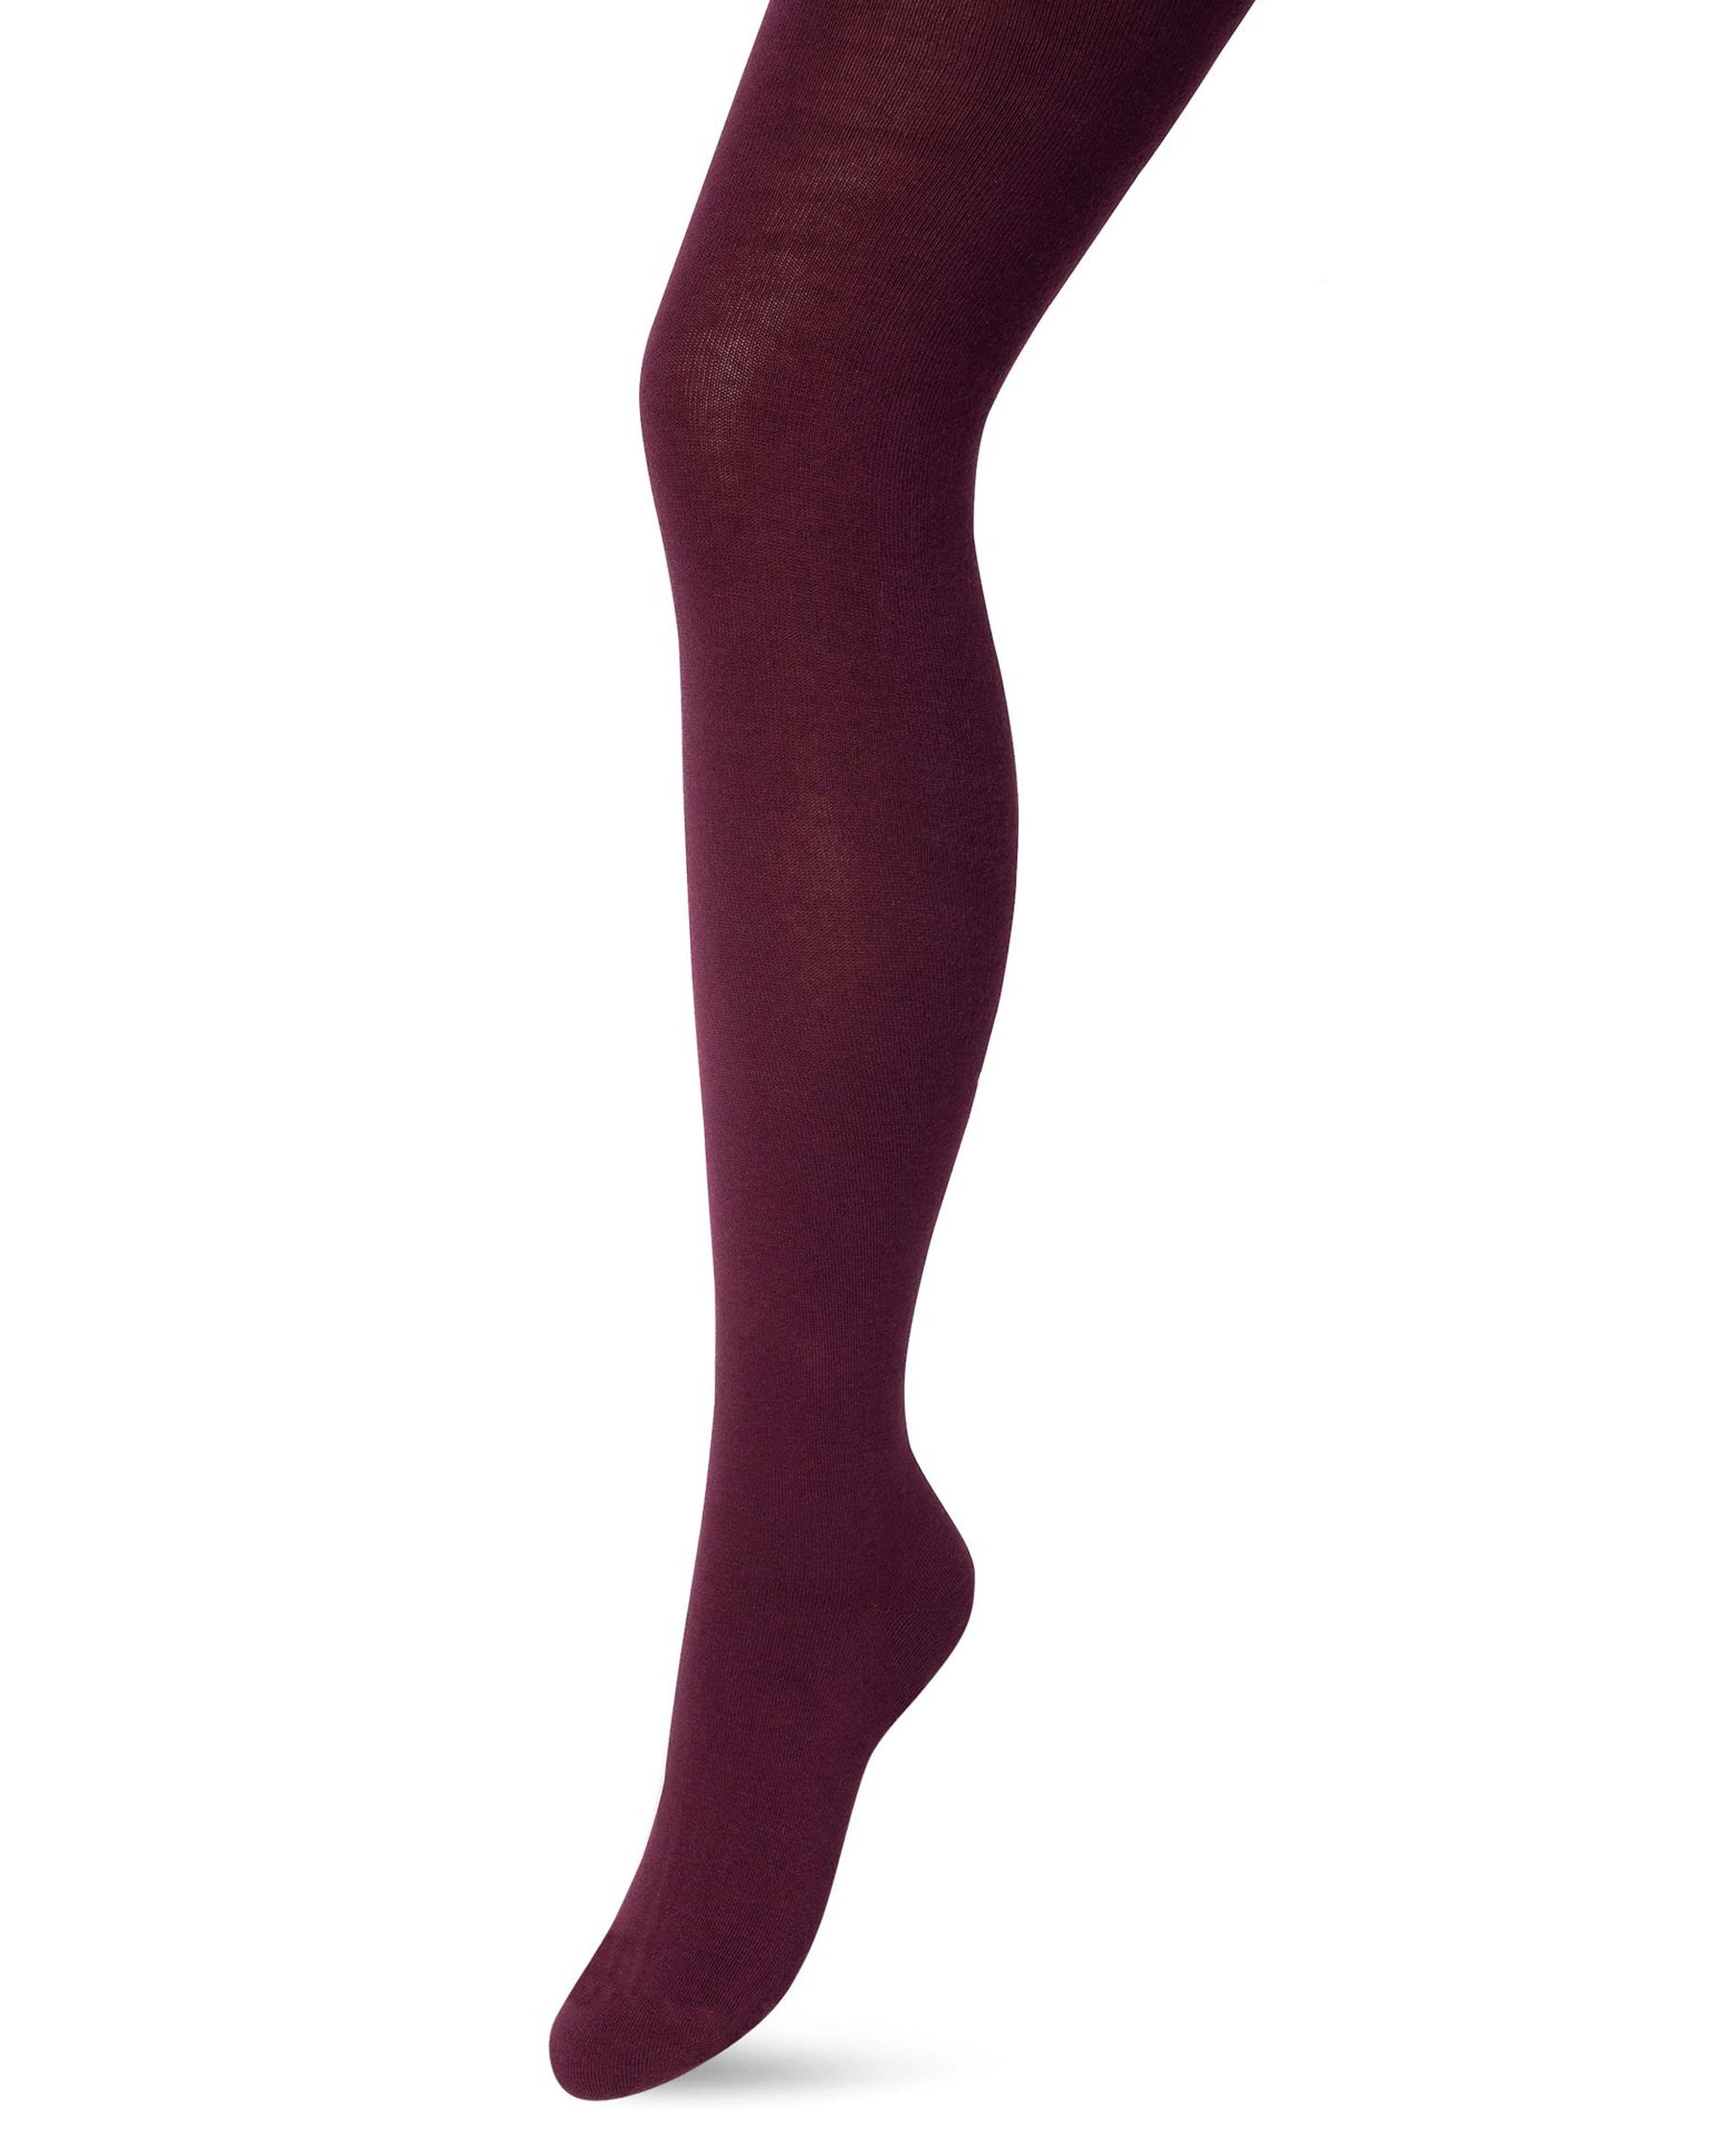 Bonnie Doon Bio Cotton Tights - Wine warm and soft knitted organic cotton Winter thermal tights.